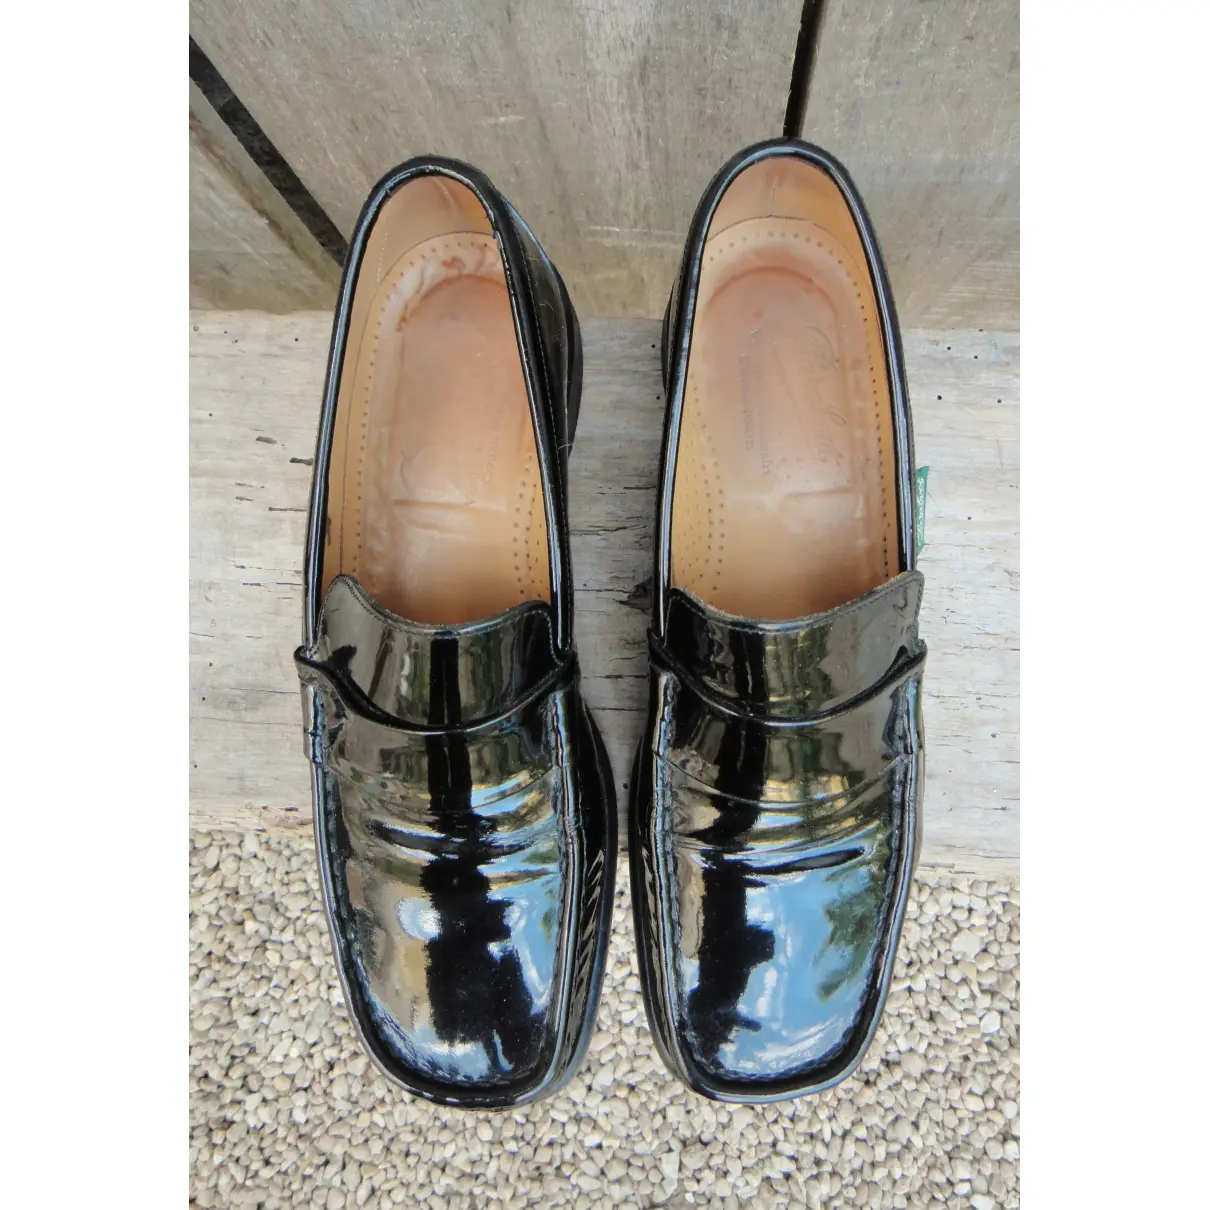 Buy Paraboot Patent leather flats online - Vintage